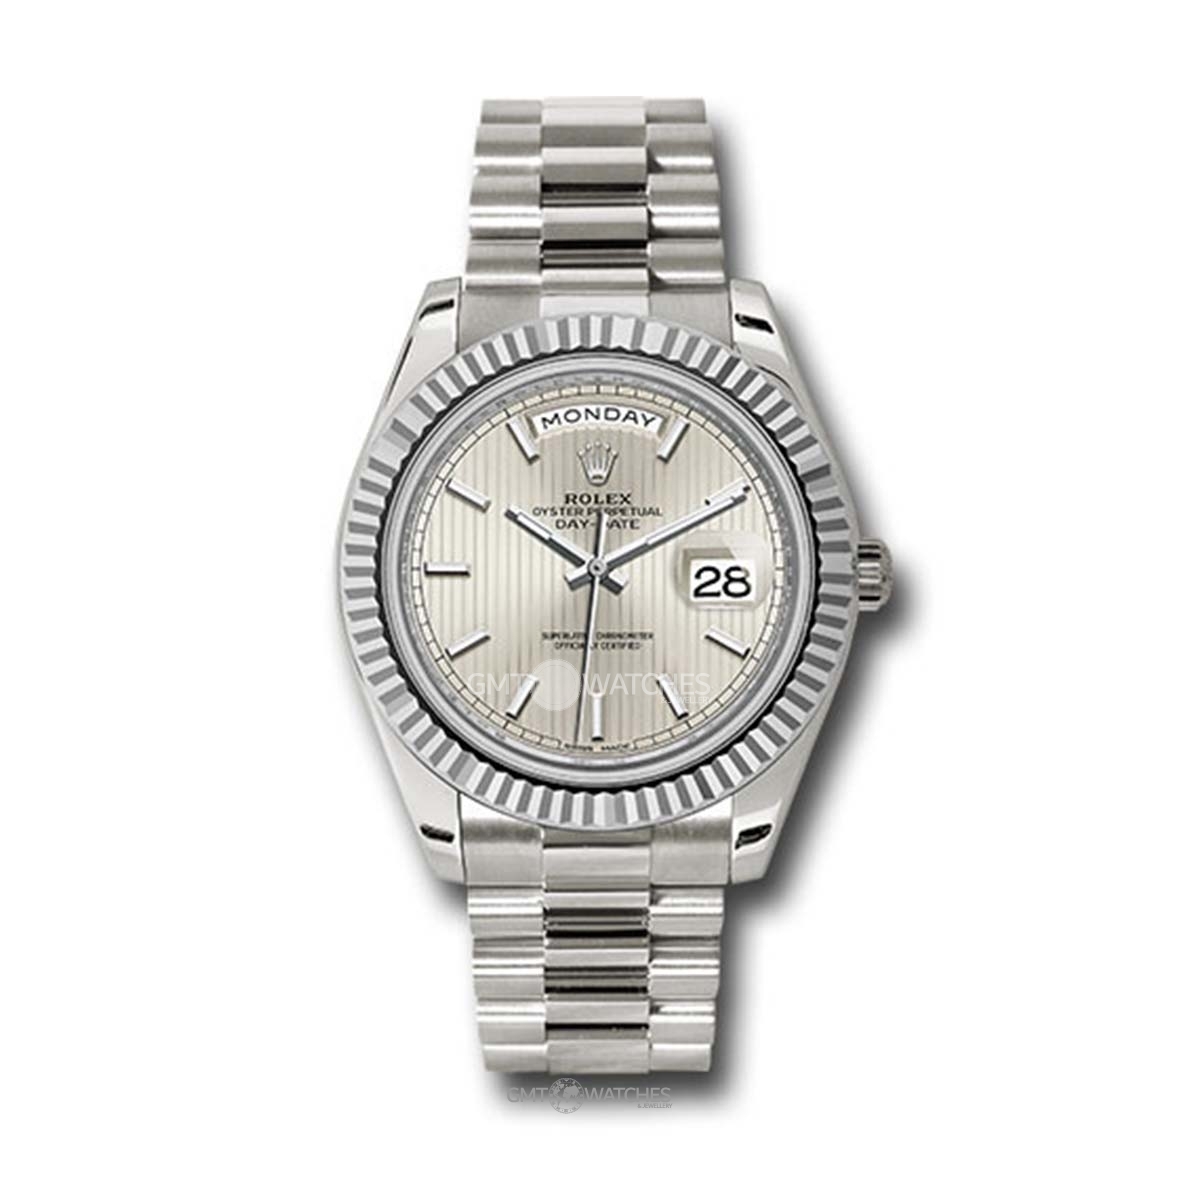 Rolex Oyster Perpetual Day-Date 40mm 18k White Gold 228239 ssmip